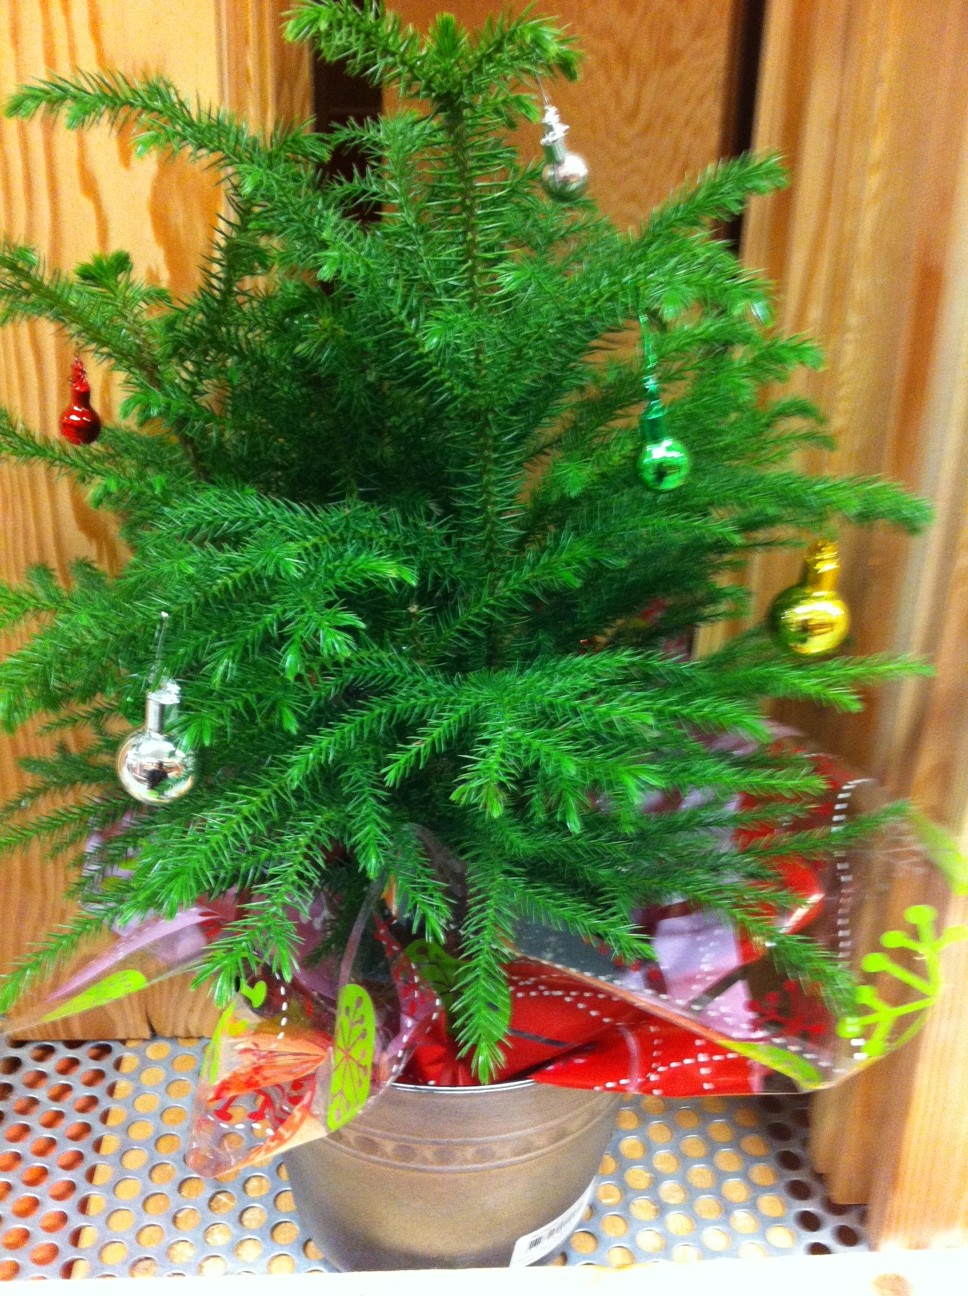 Are real Christmas trees “greener”? | Green Action Centre